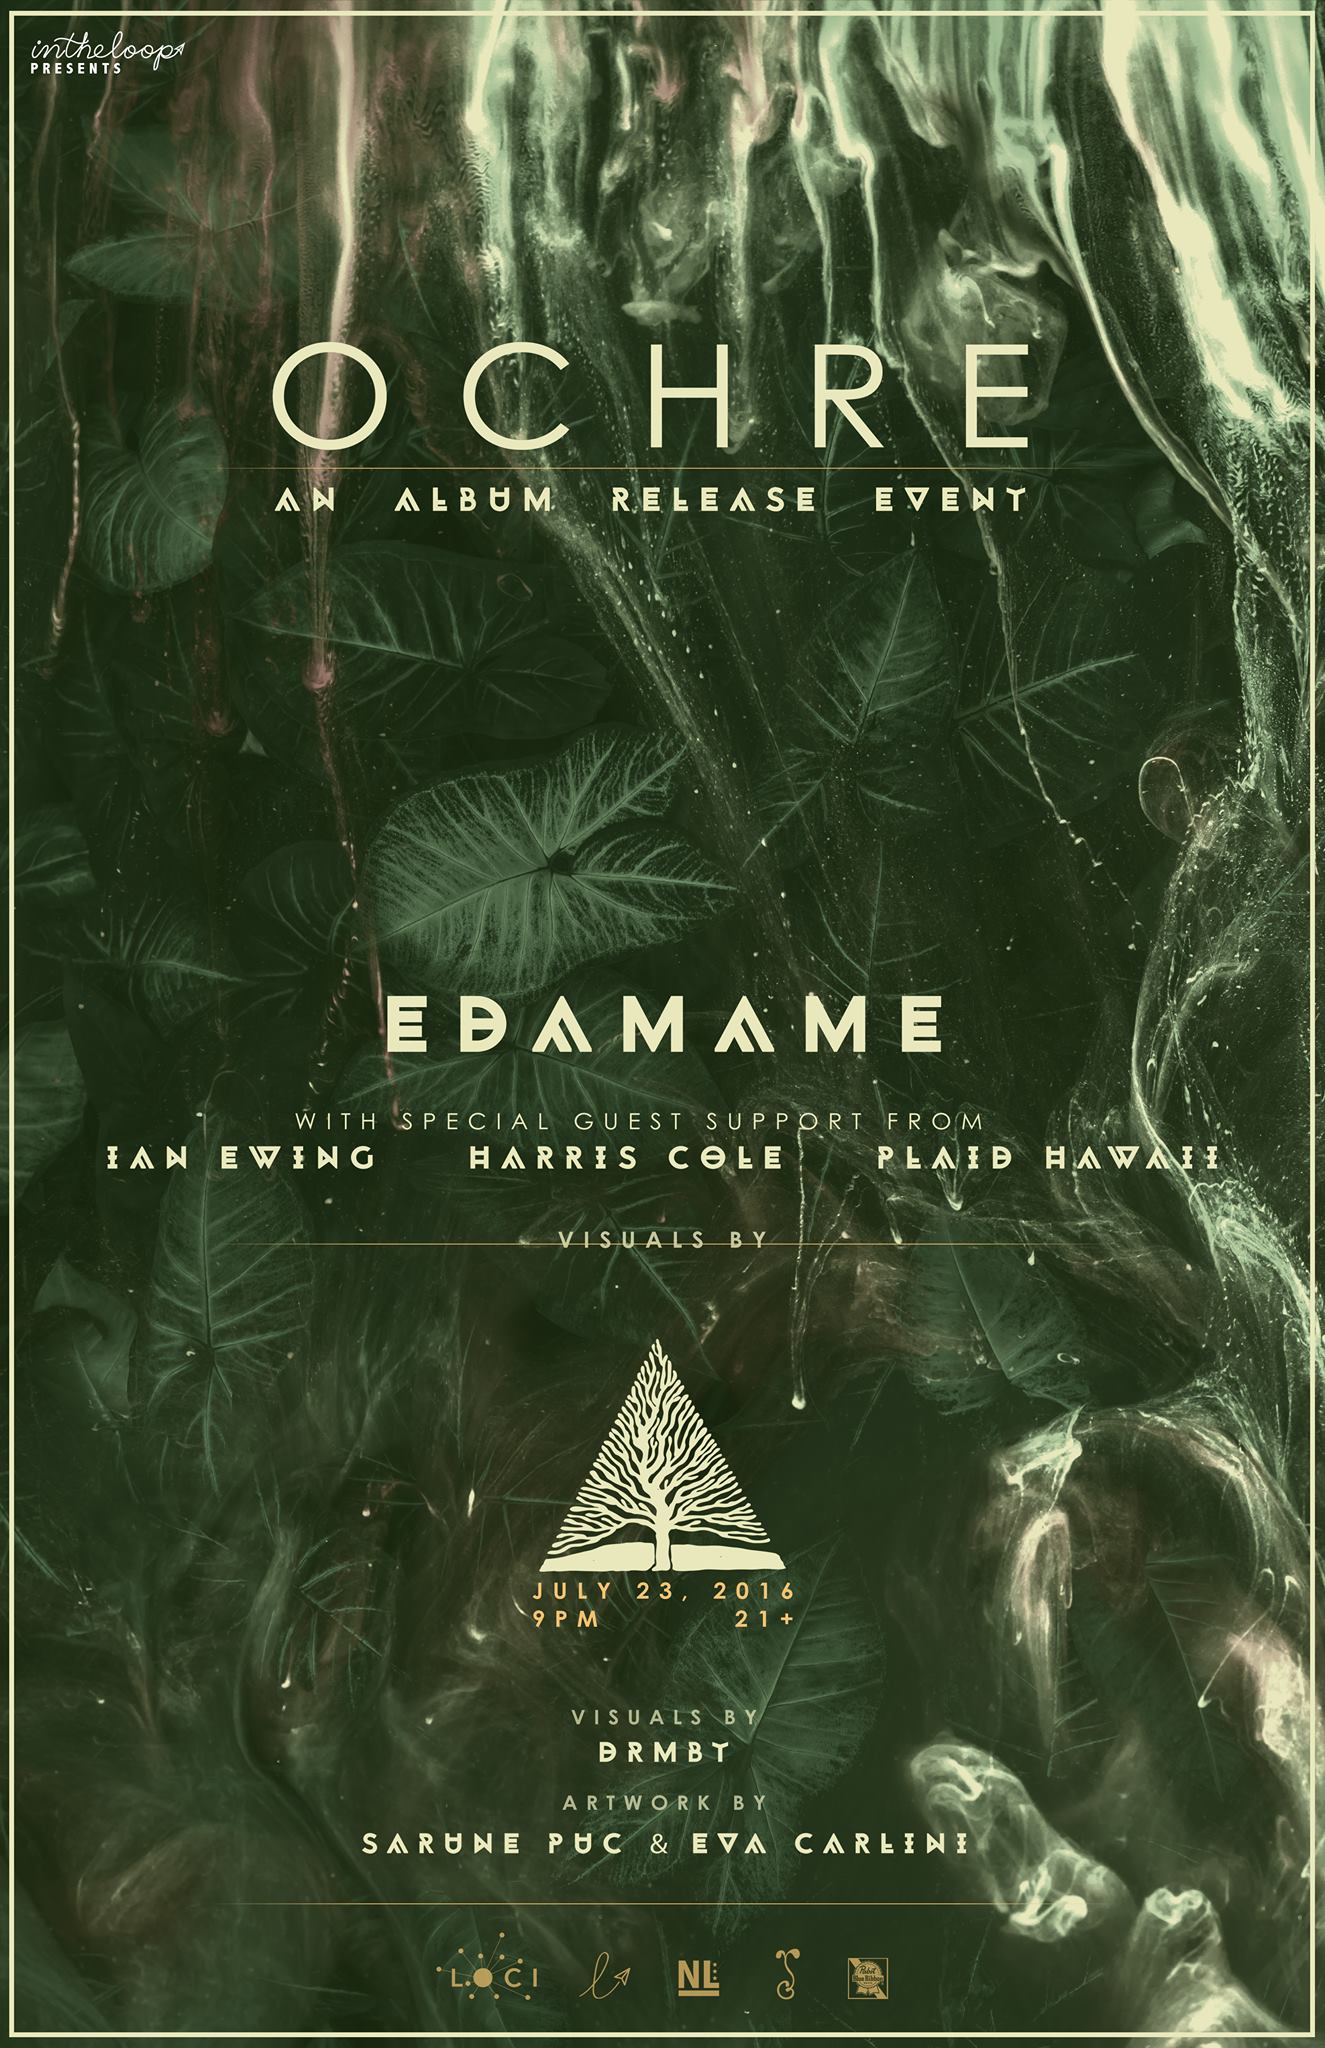 Ochre - An Album Release Event (TICKETS ARE NO LONGER ON SALE ONLINE _ PLEASE PURCHASE AT THE DOOR)